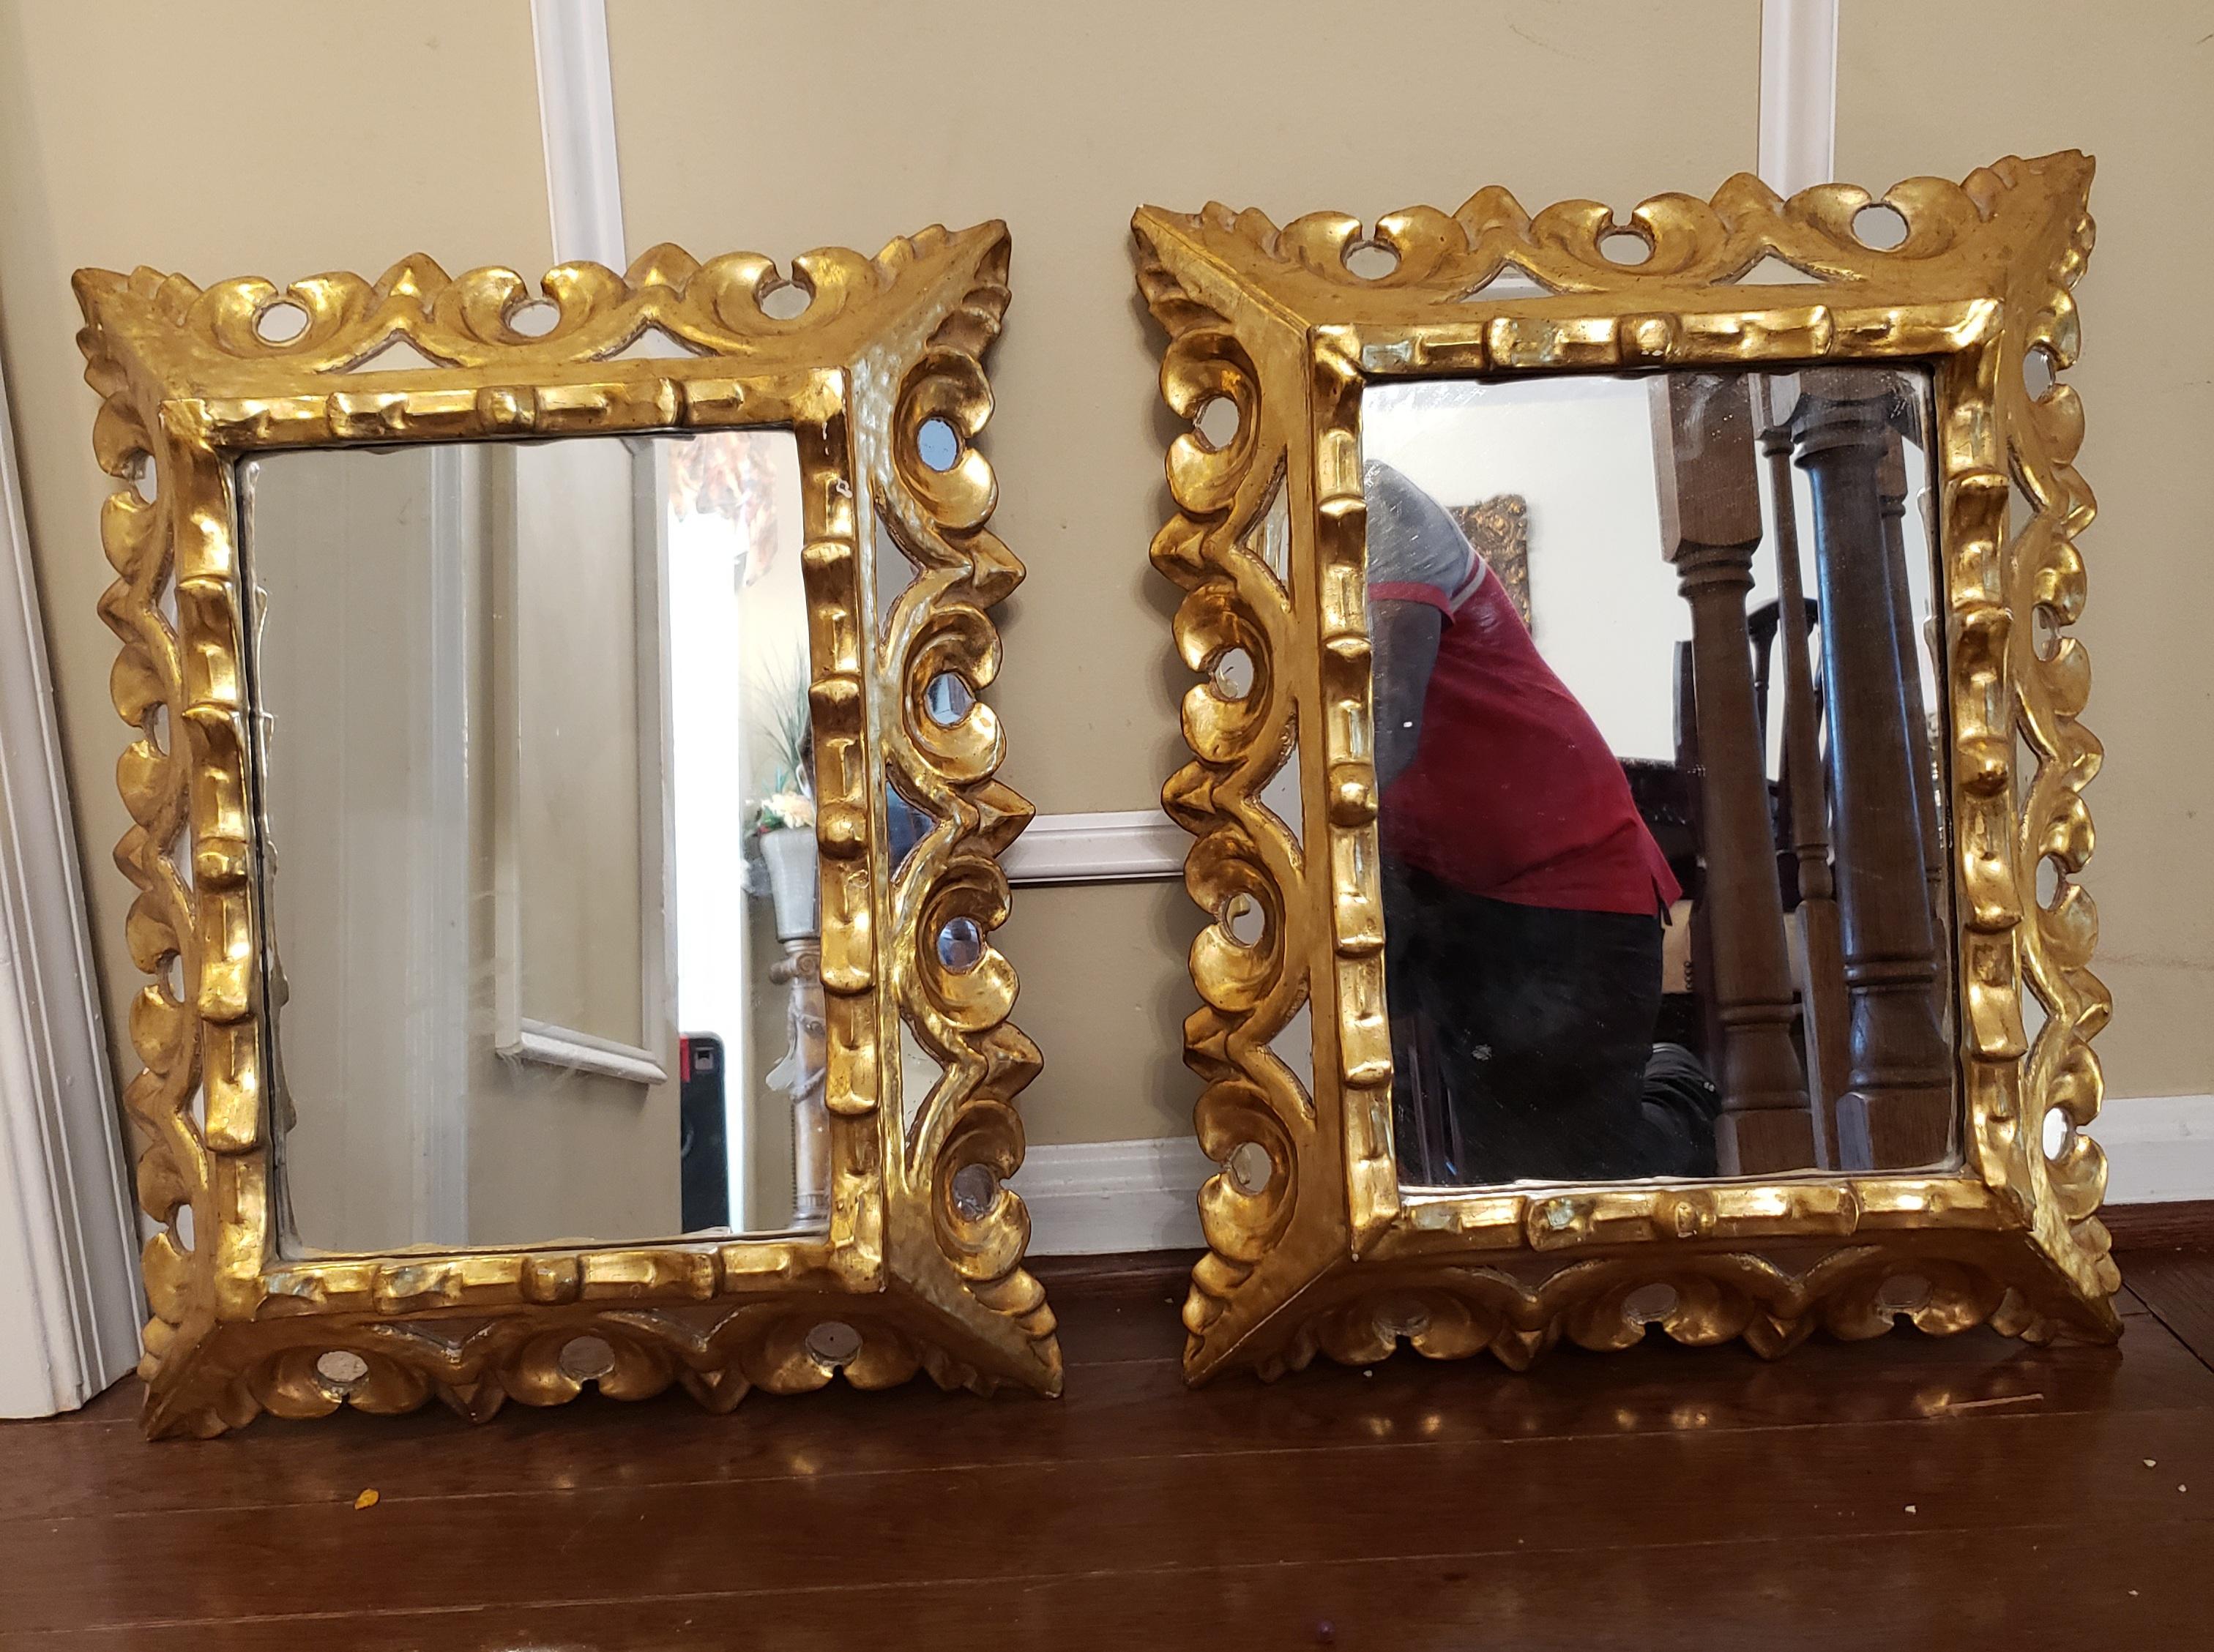 Pair of Italian style giltwood frame mirrored insets mirrors, Circa 1940s. Solid wood frame material.
Gilt work in good condition.
Measure 15.75